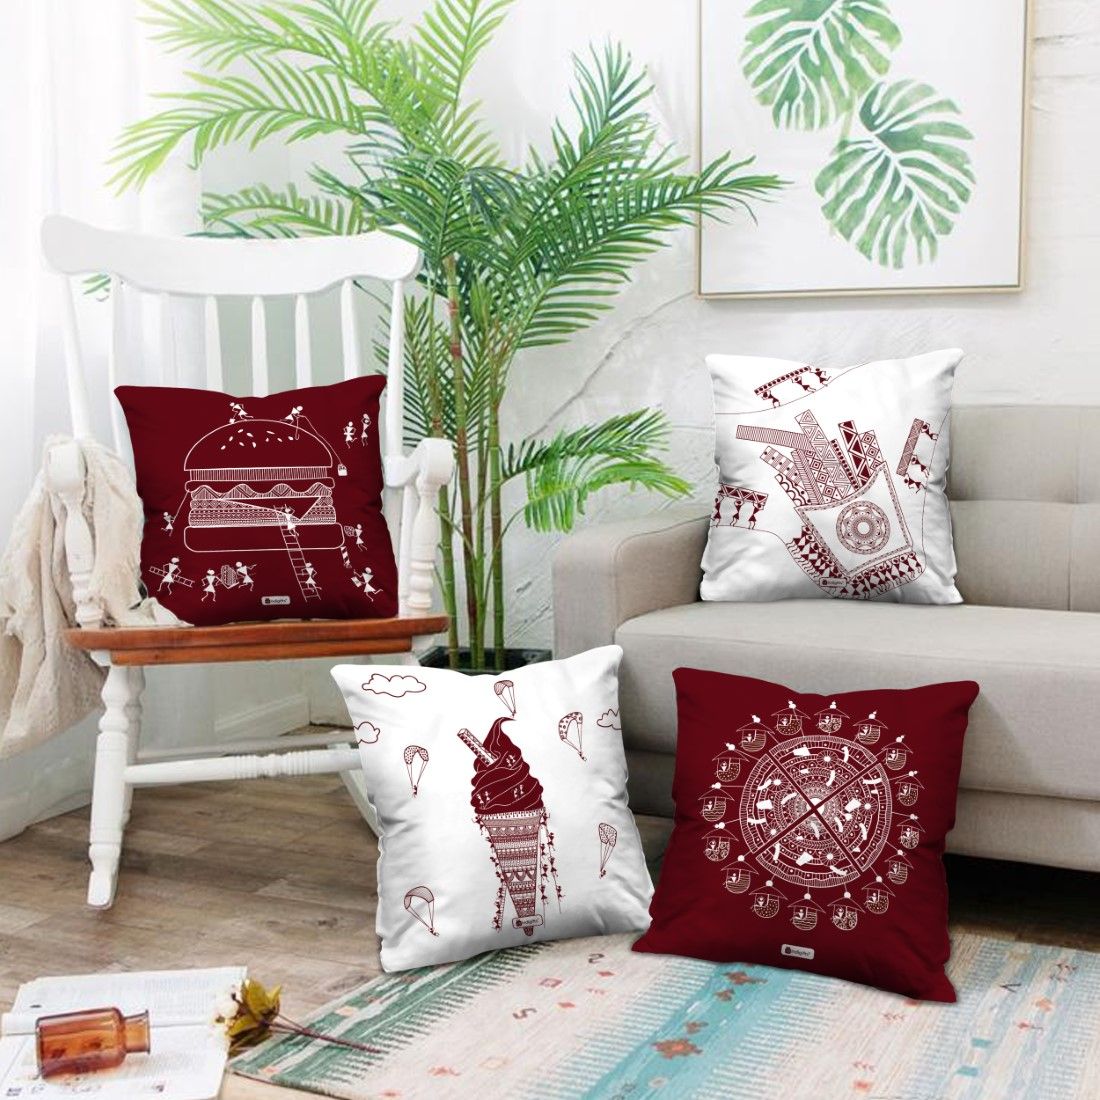 Indigifts Diwali Decoration for Home, Satin Small Warli Art Food Lovers Themed Ethnic Designer Printed Cushion Cover Square Pillow Set of 4 with Filler for Foodie - 12x12 Inch